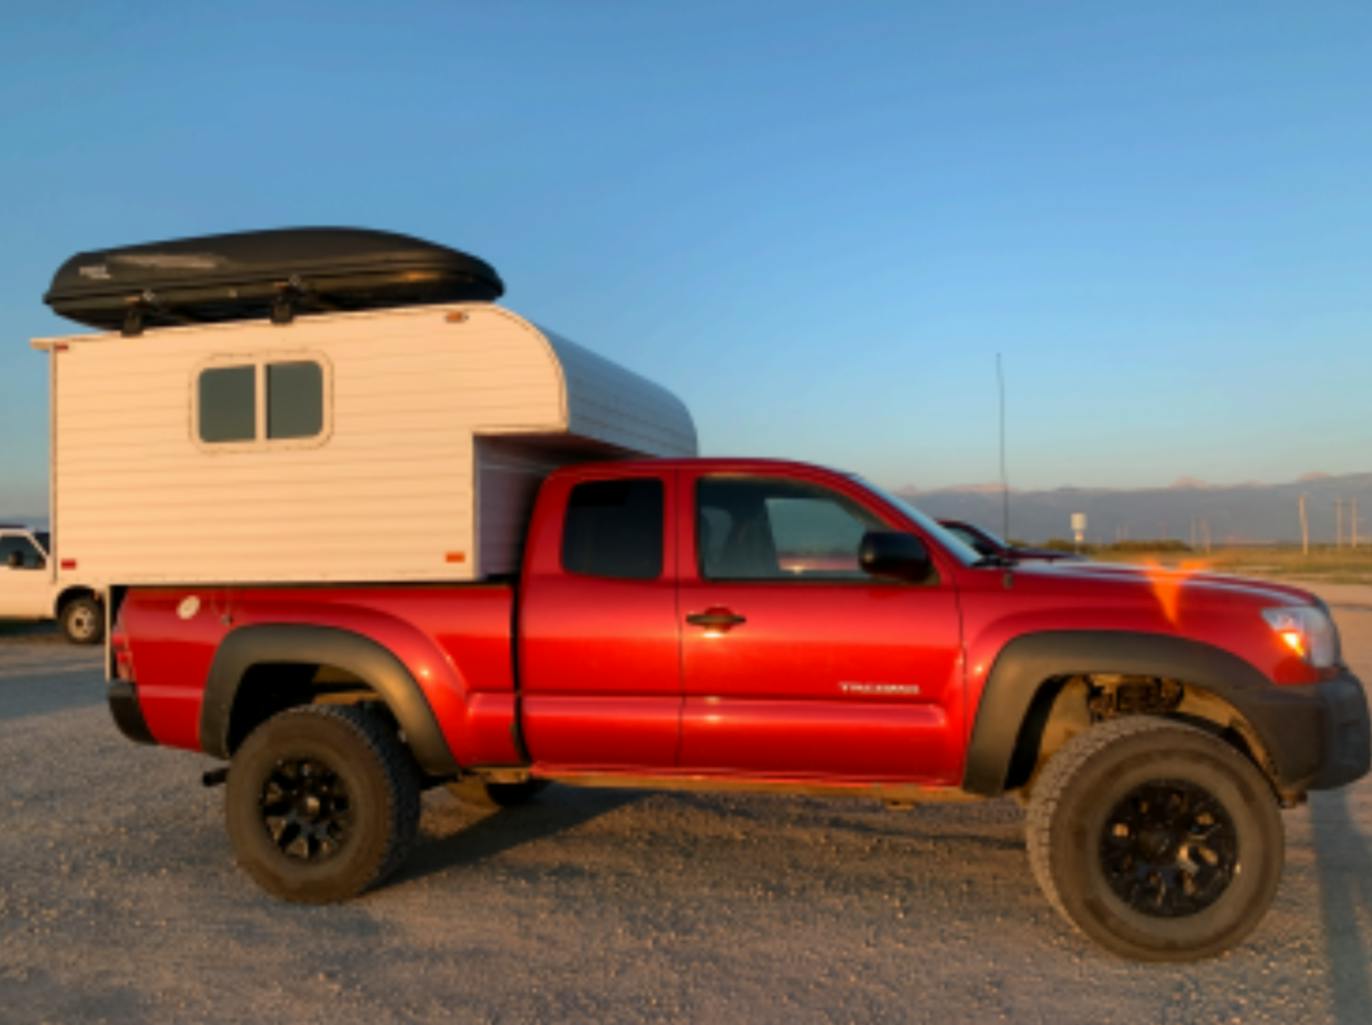 Red Toyota Tacoma truck with a white camper in the bed of the truck. The camper has a black storage box on top of it and the tires are black.